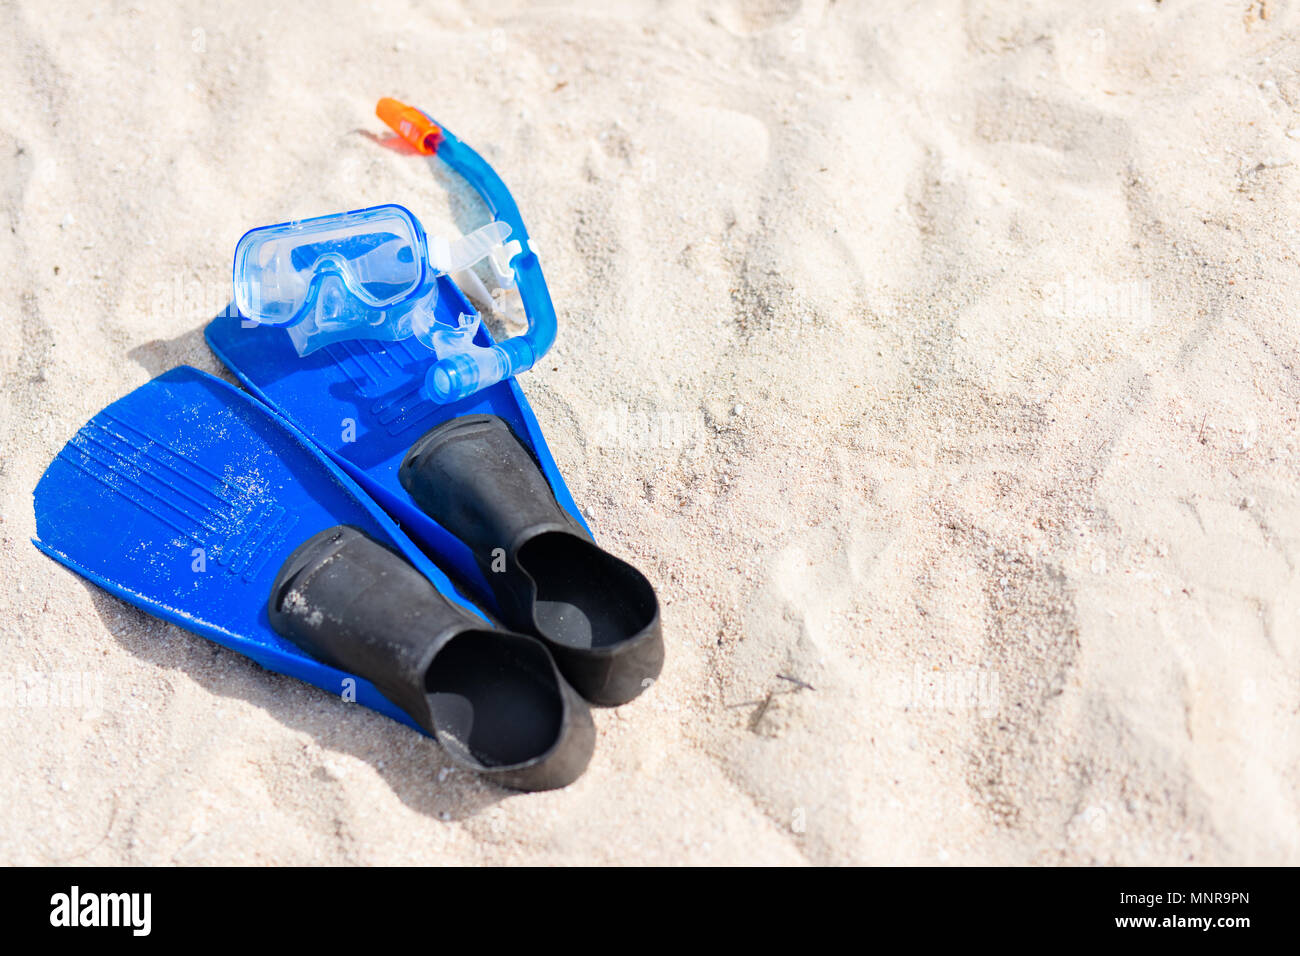 Snorkeling equipment mask, snorkel and fins on sand at beach Stock Photo